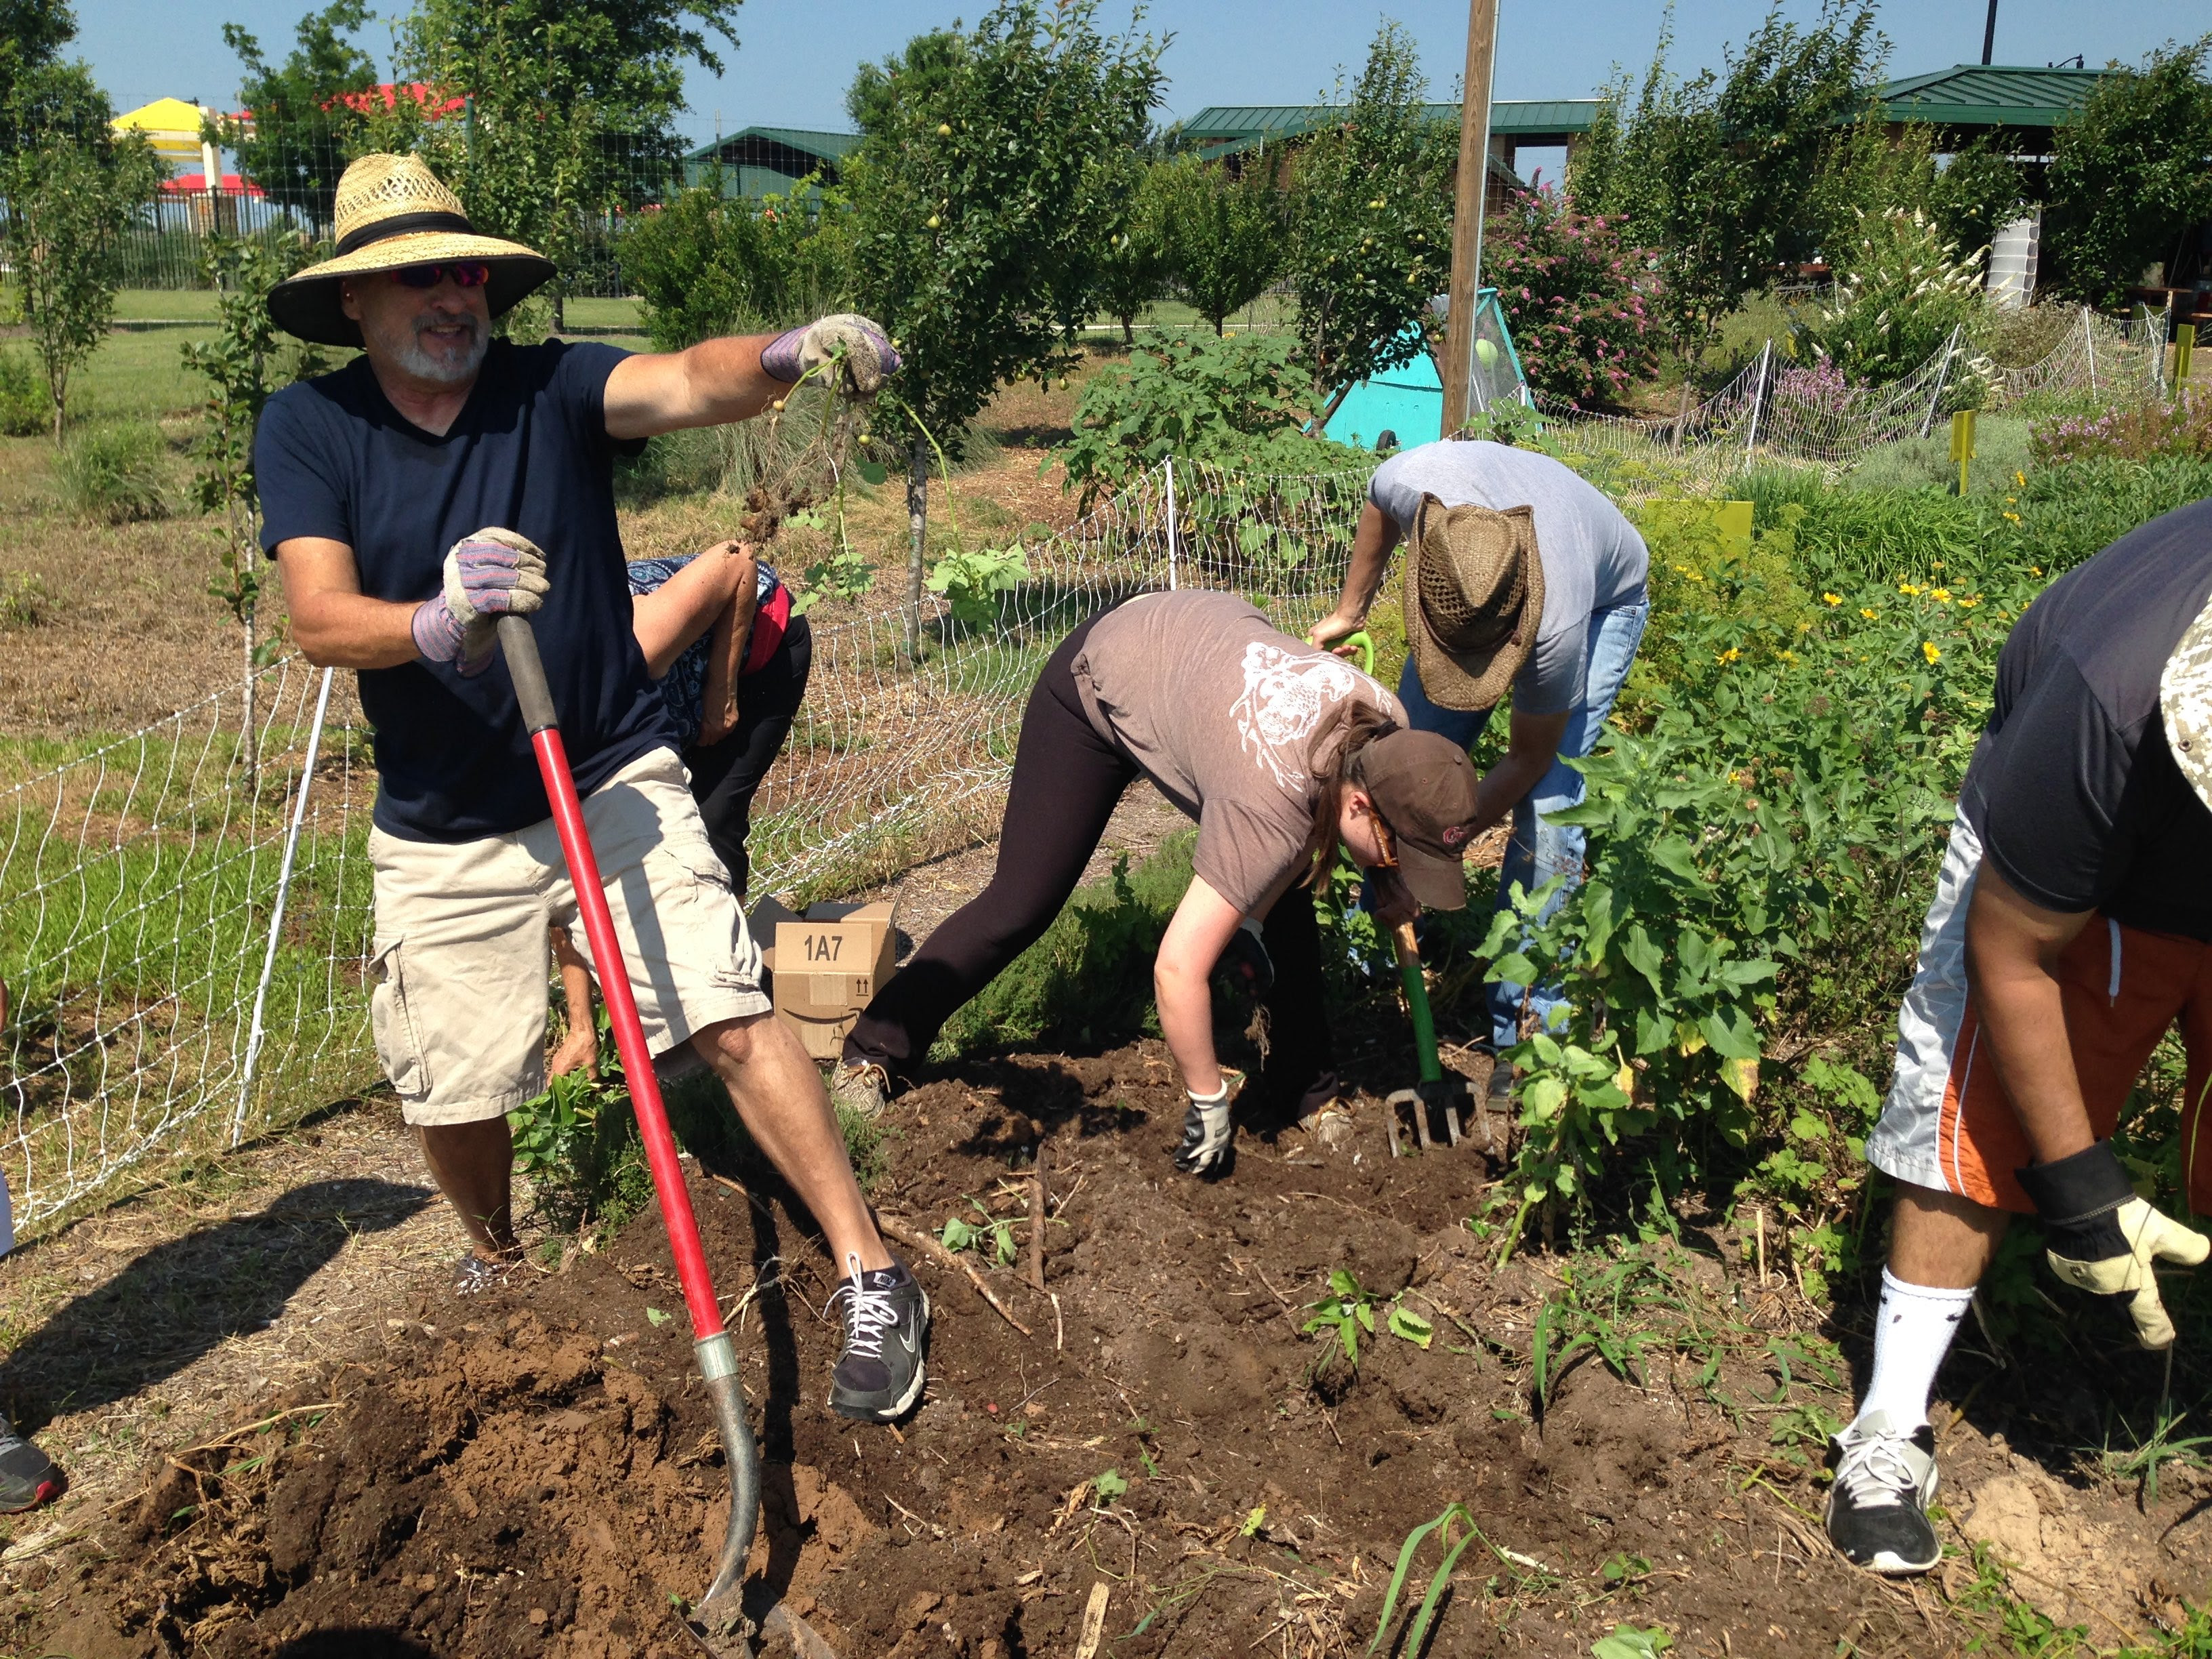 The Sunfield Community Garden is hosting a free gardening class on Saturday.